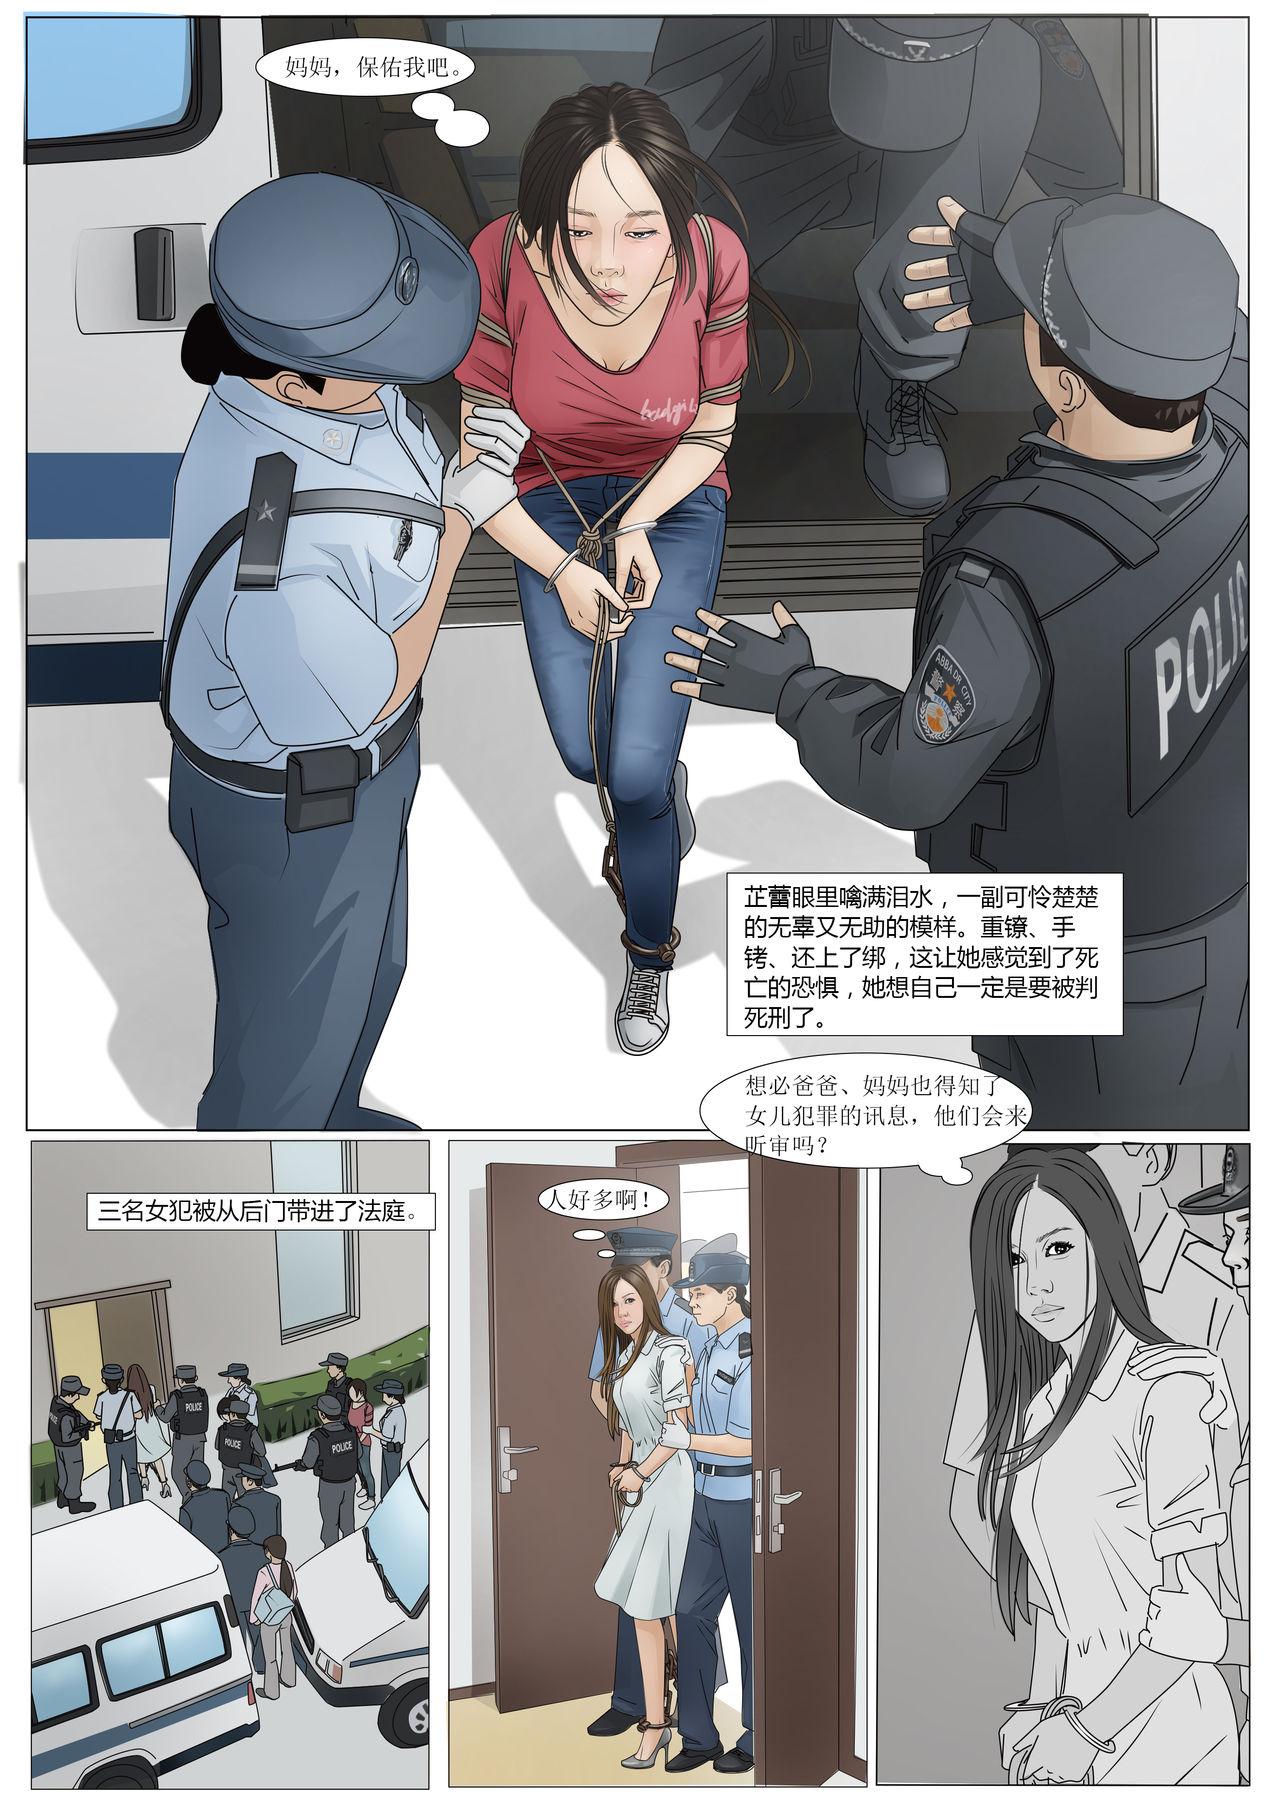 Long Hair 枫语漫画 Foryou 《极度重犯》第八话 Three Female Prisoners 8 Chinese Free Rough Porn - Page 10